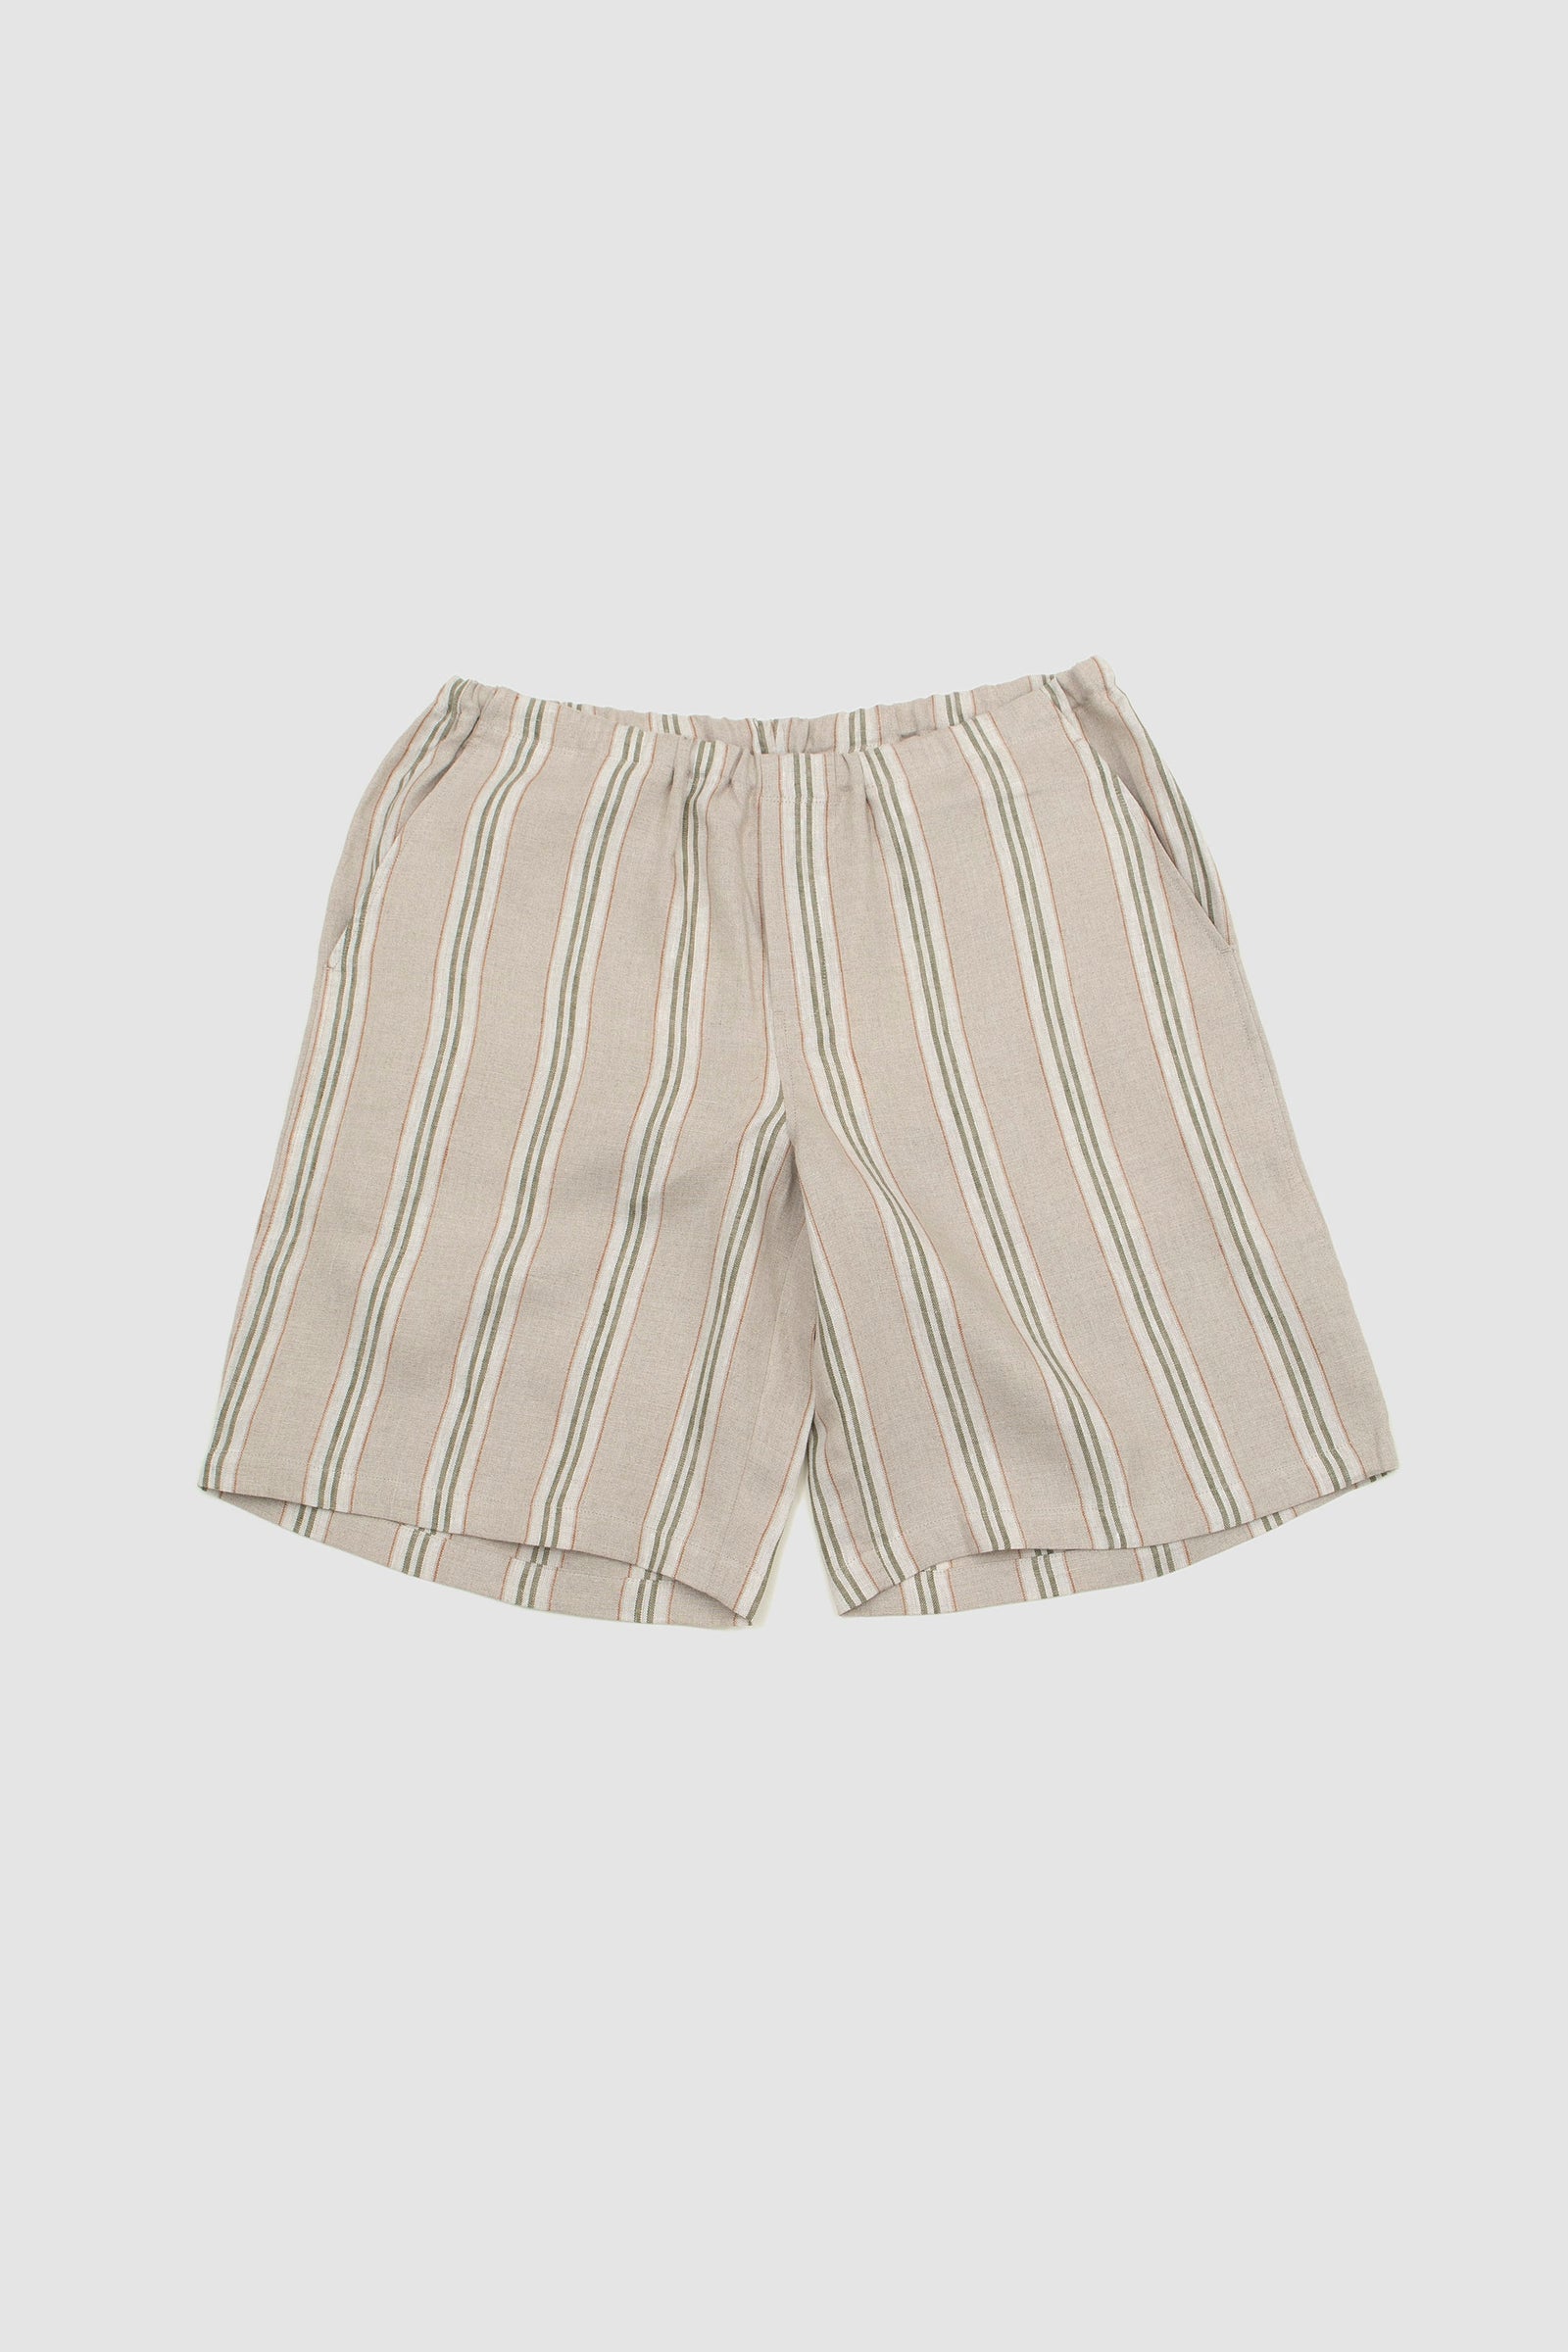 SPORTIVO [Another shorts 3.0 green striped]